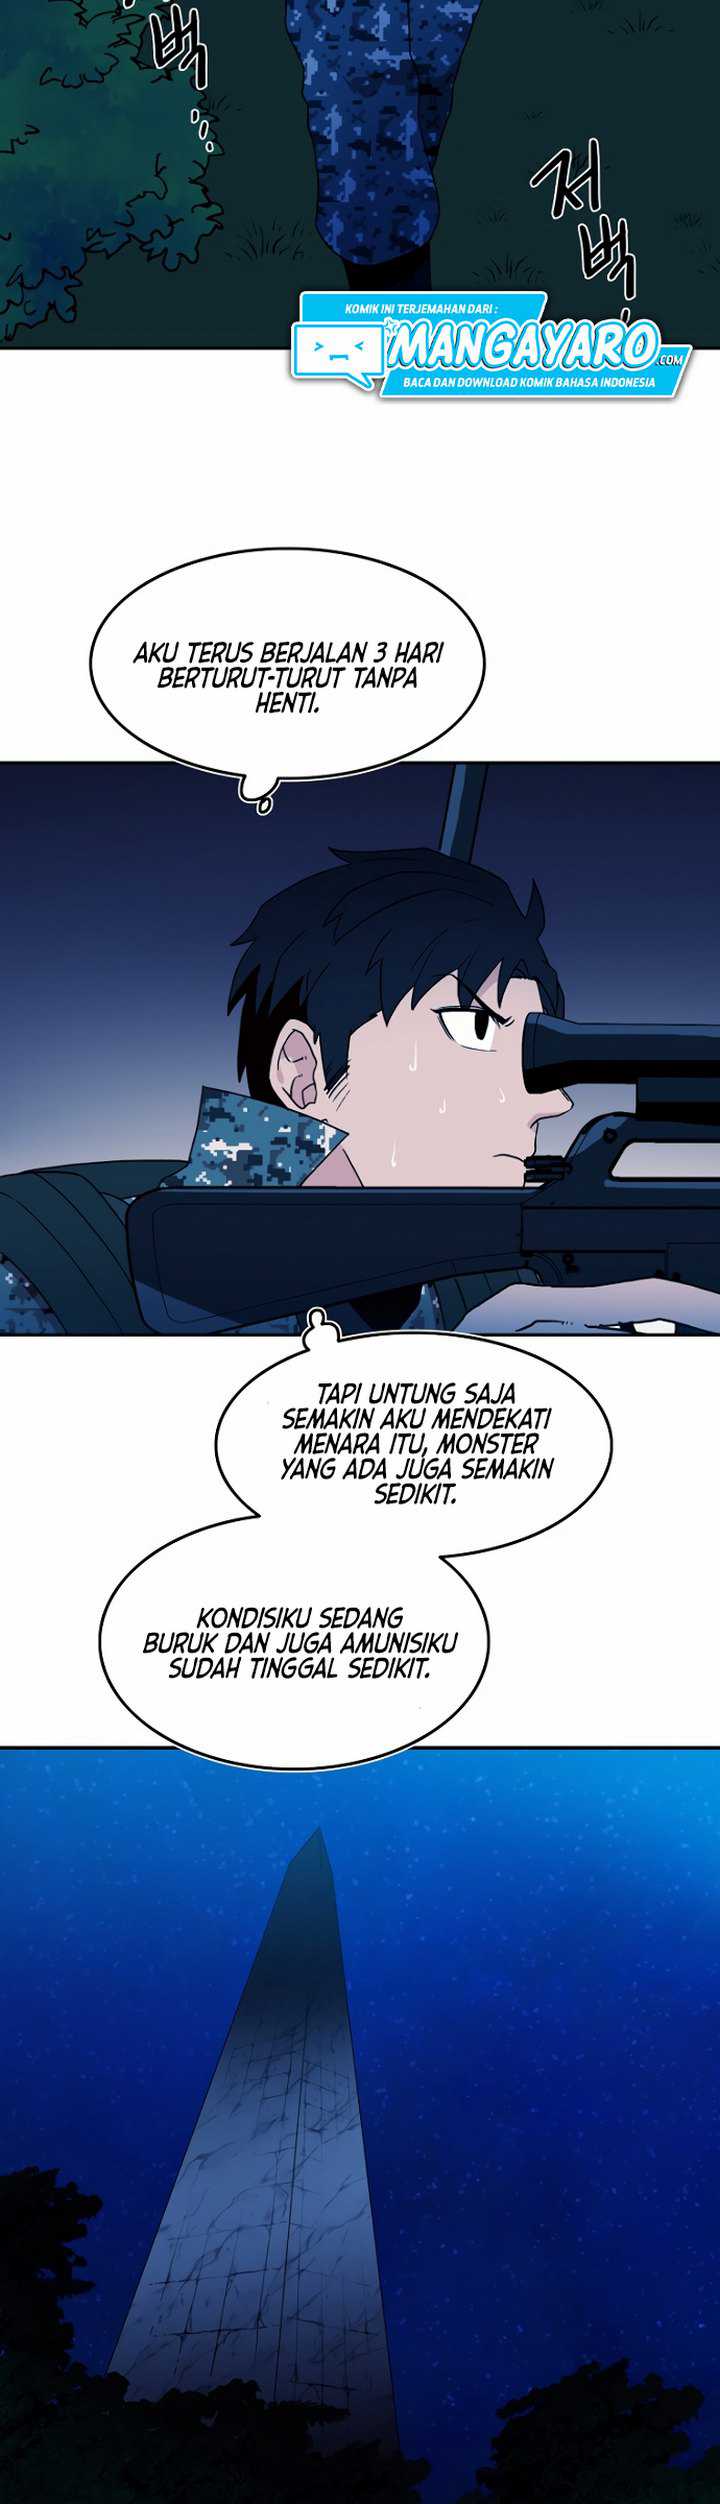 Magical Shooting Sniper Of Steel Chapter 6.1